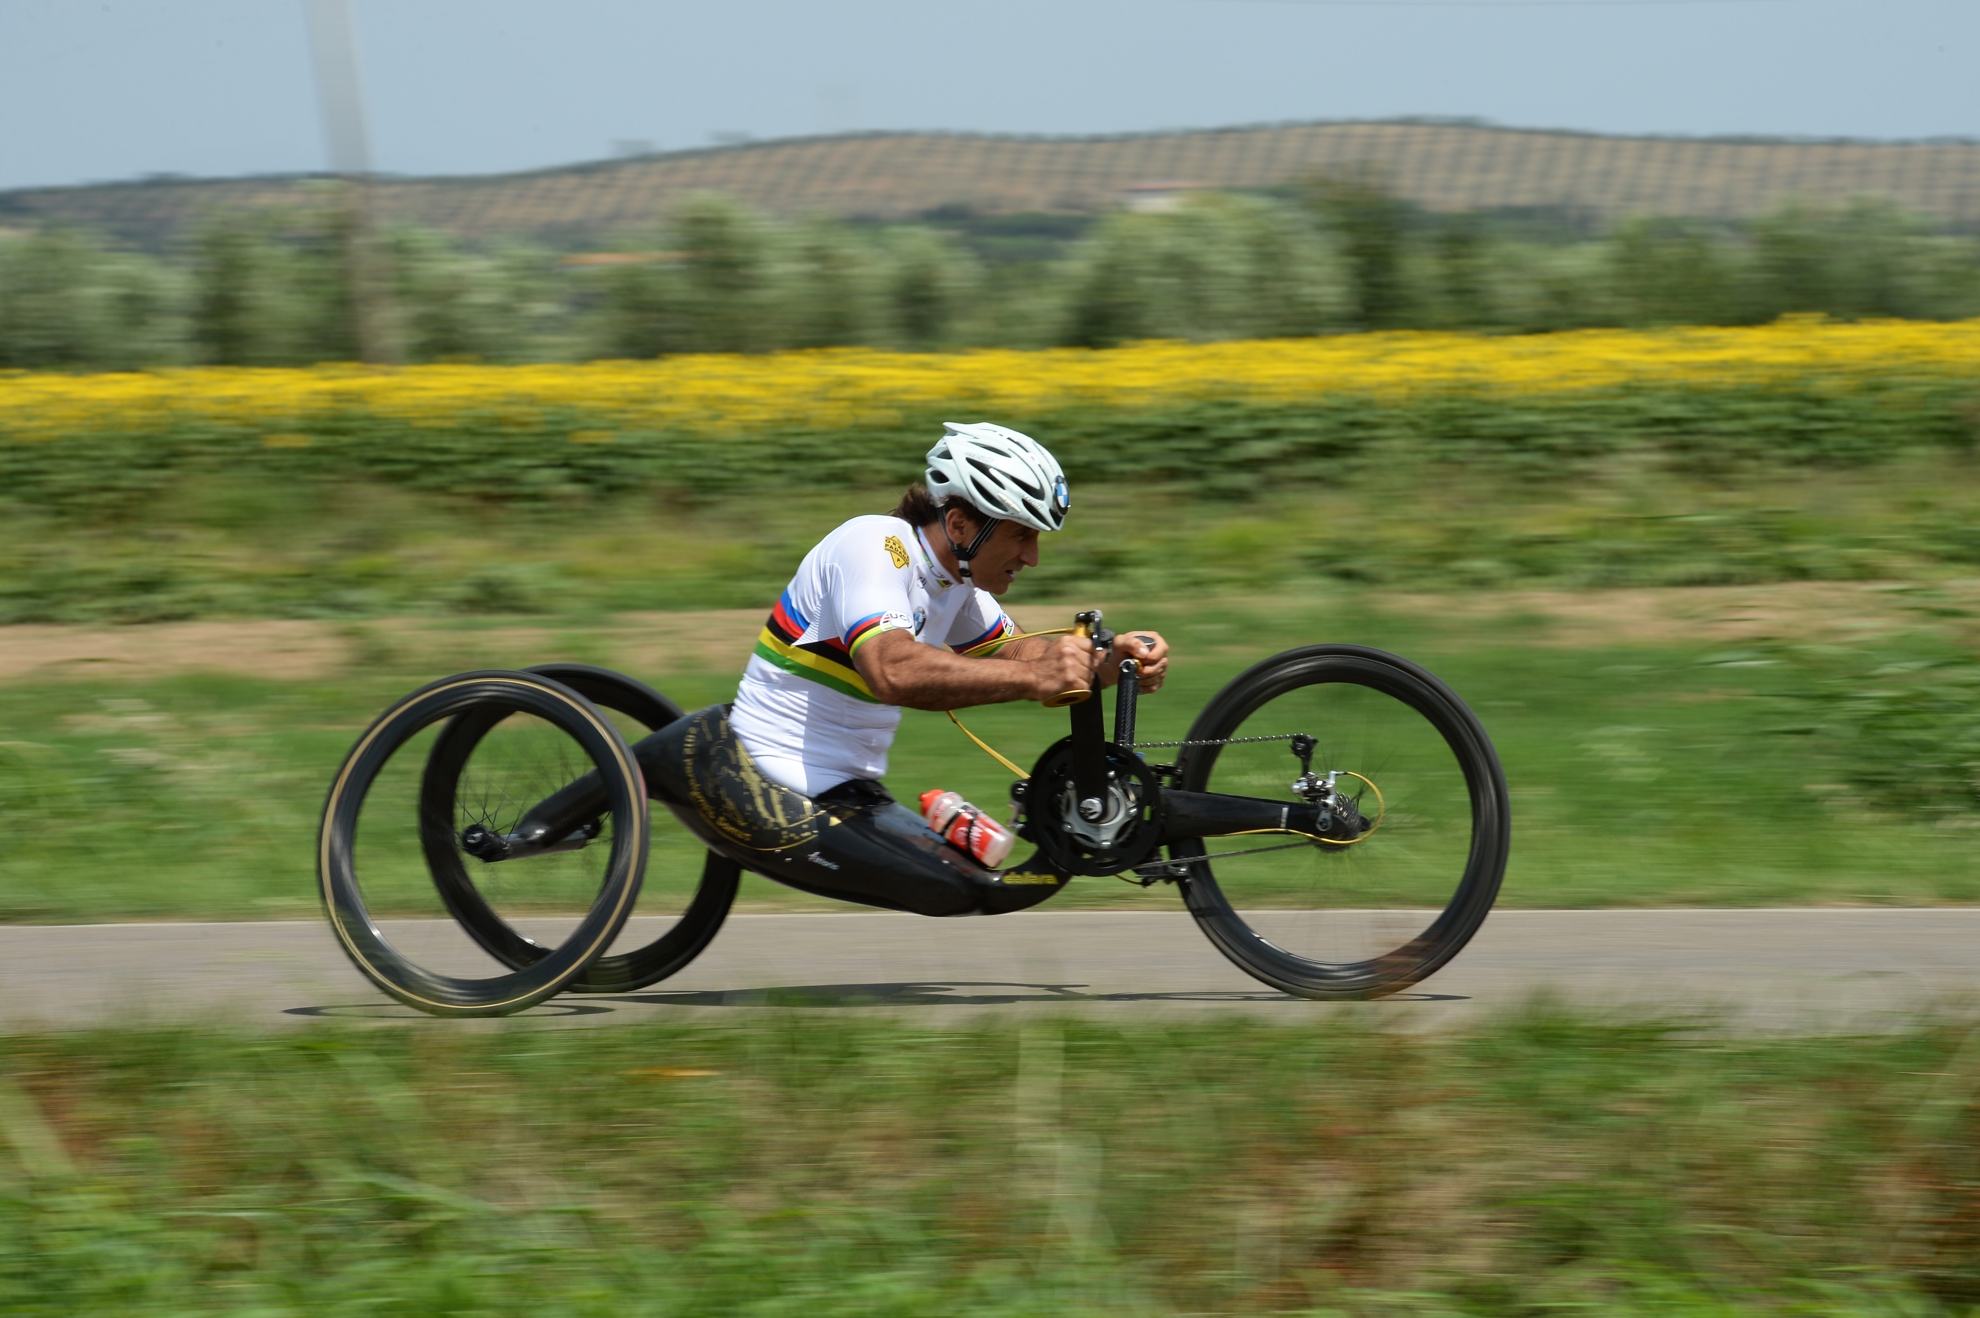 Para-Cycling World Championship in the US